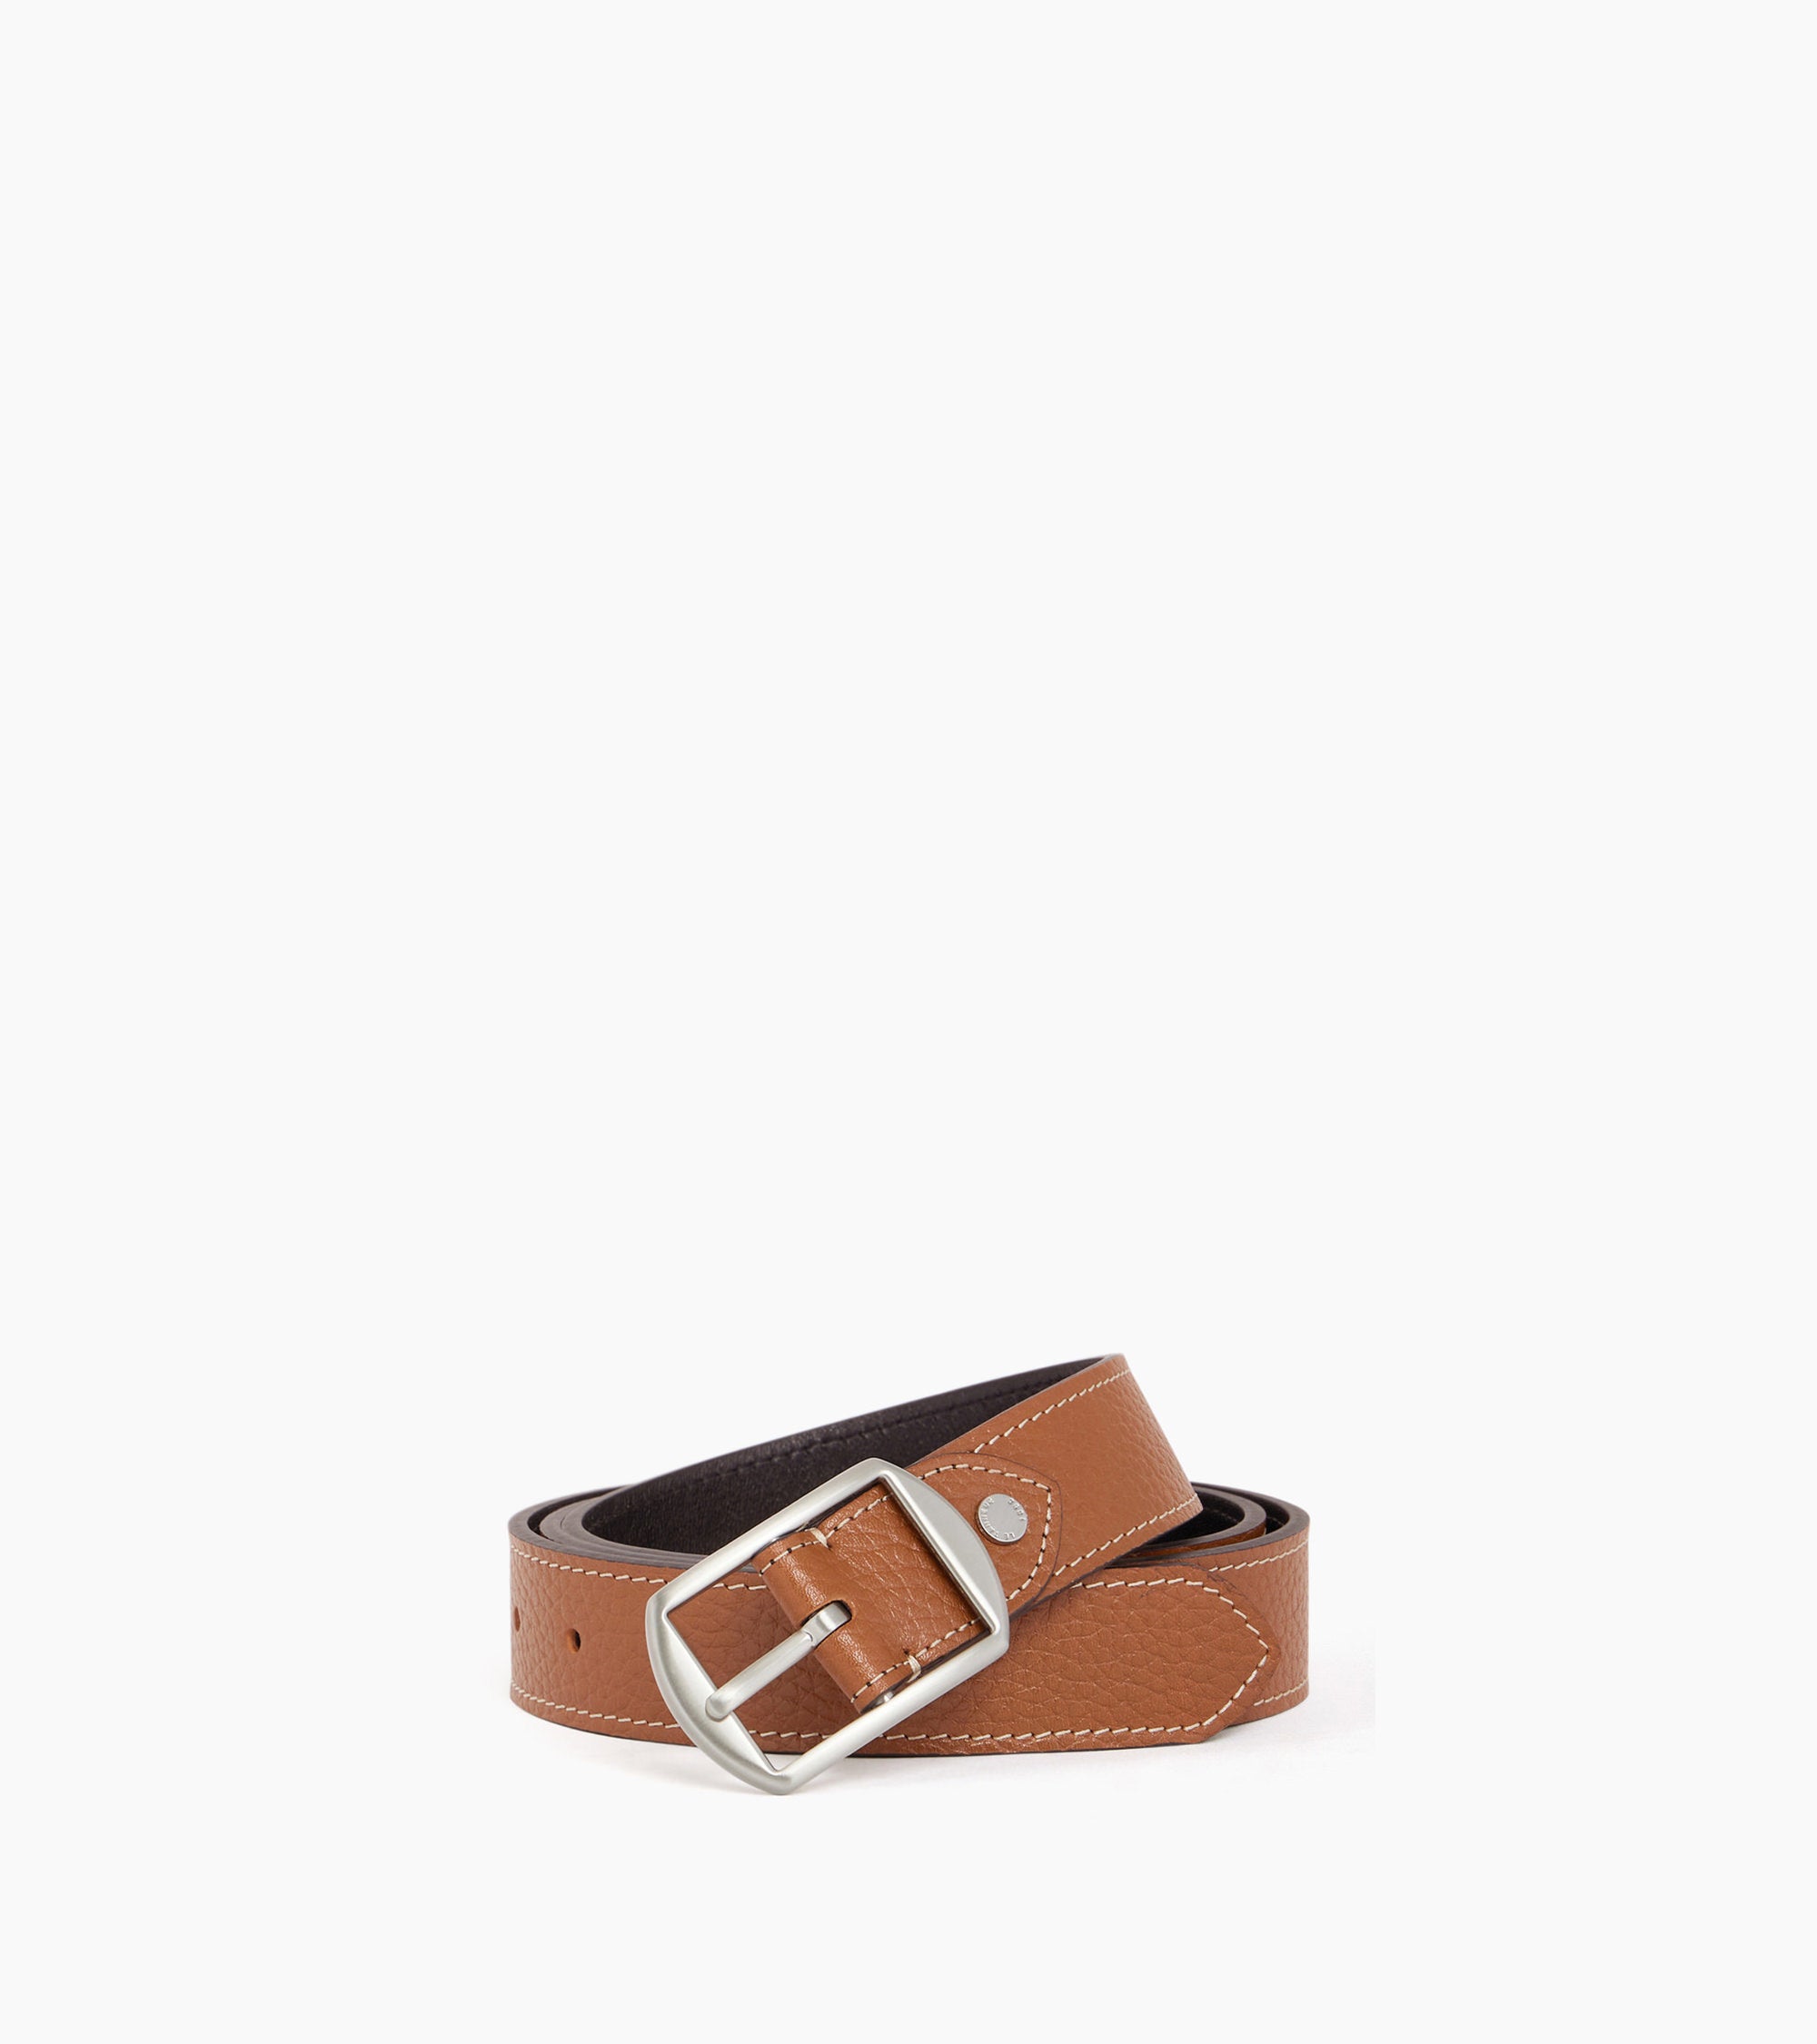 Men's reversible belt with square buckle in pebbled leather